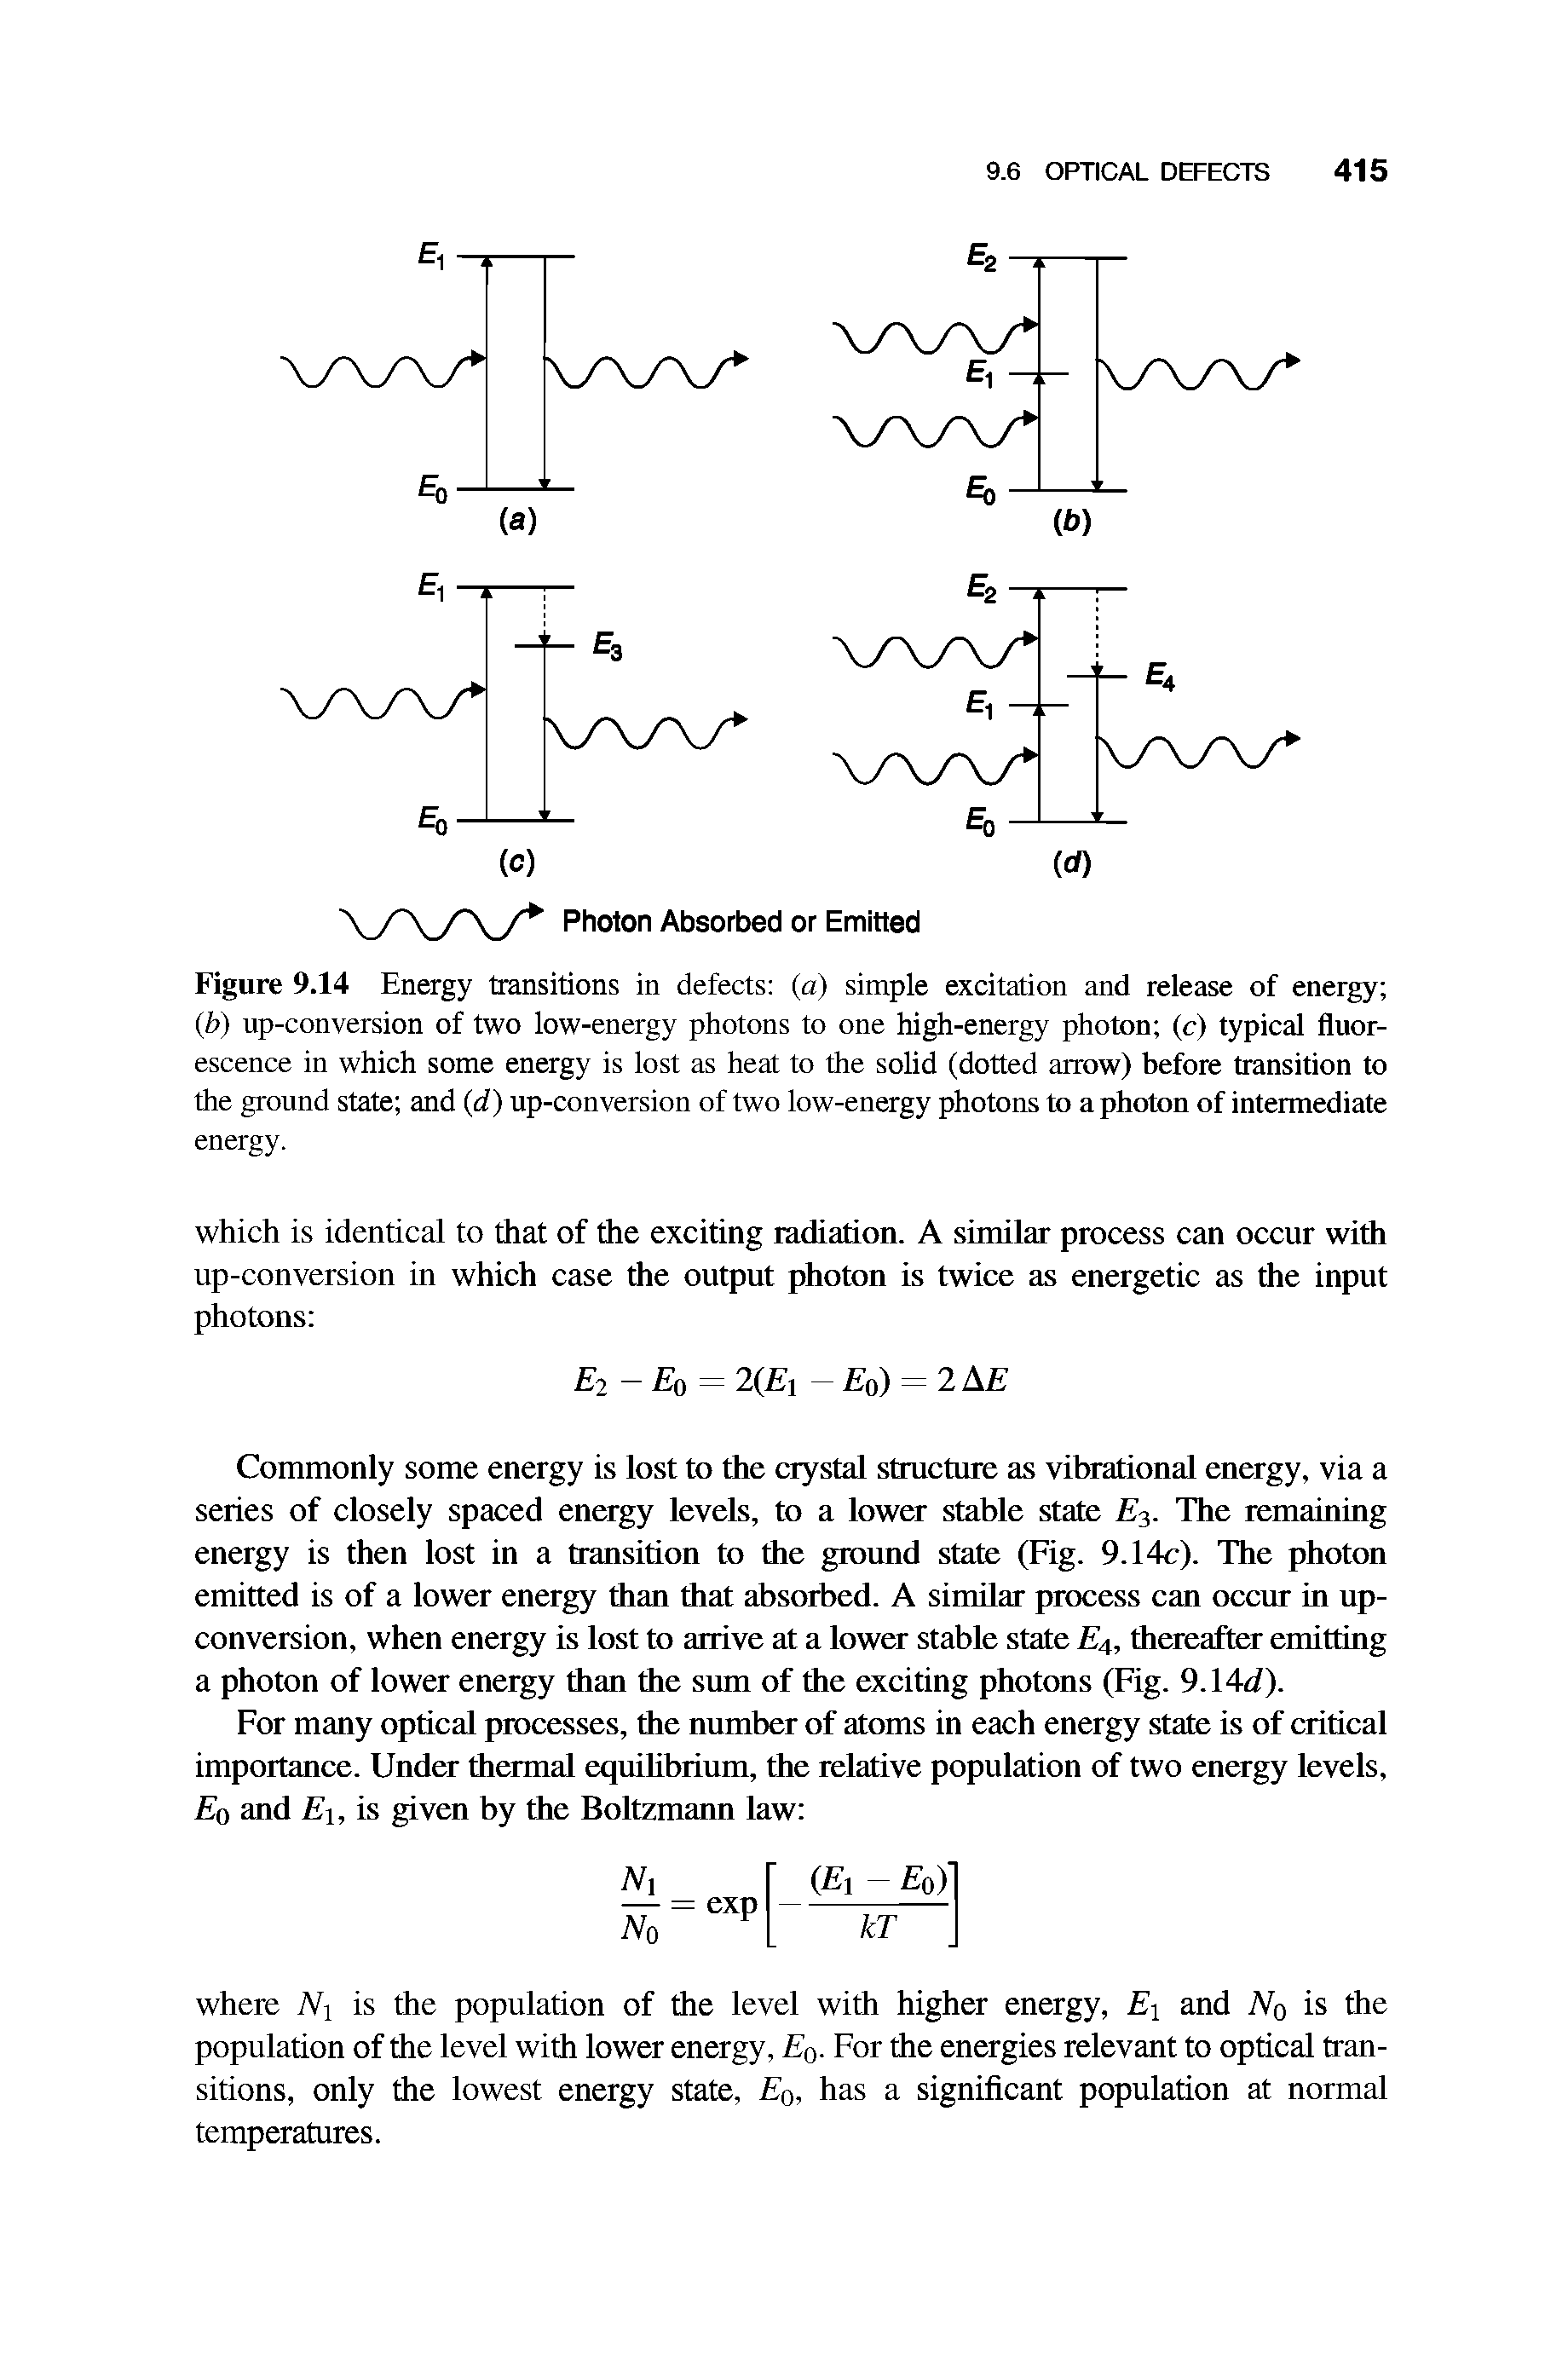 Figure 9.14 Energy transitions in defects (a) simple excitation and release of energy (.b) up-conversion of two low-energy photons to one high-energy photon (c) typical fluorescence in which some energy is lost as heat to the solid (dotted arrow) before transition to the ground state and (d) up-conversion of two low-energy photons to a photon of intermediate...